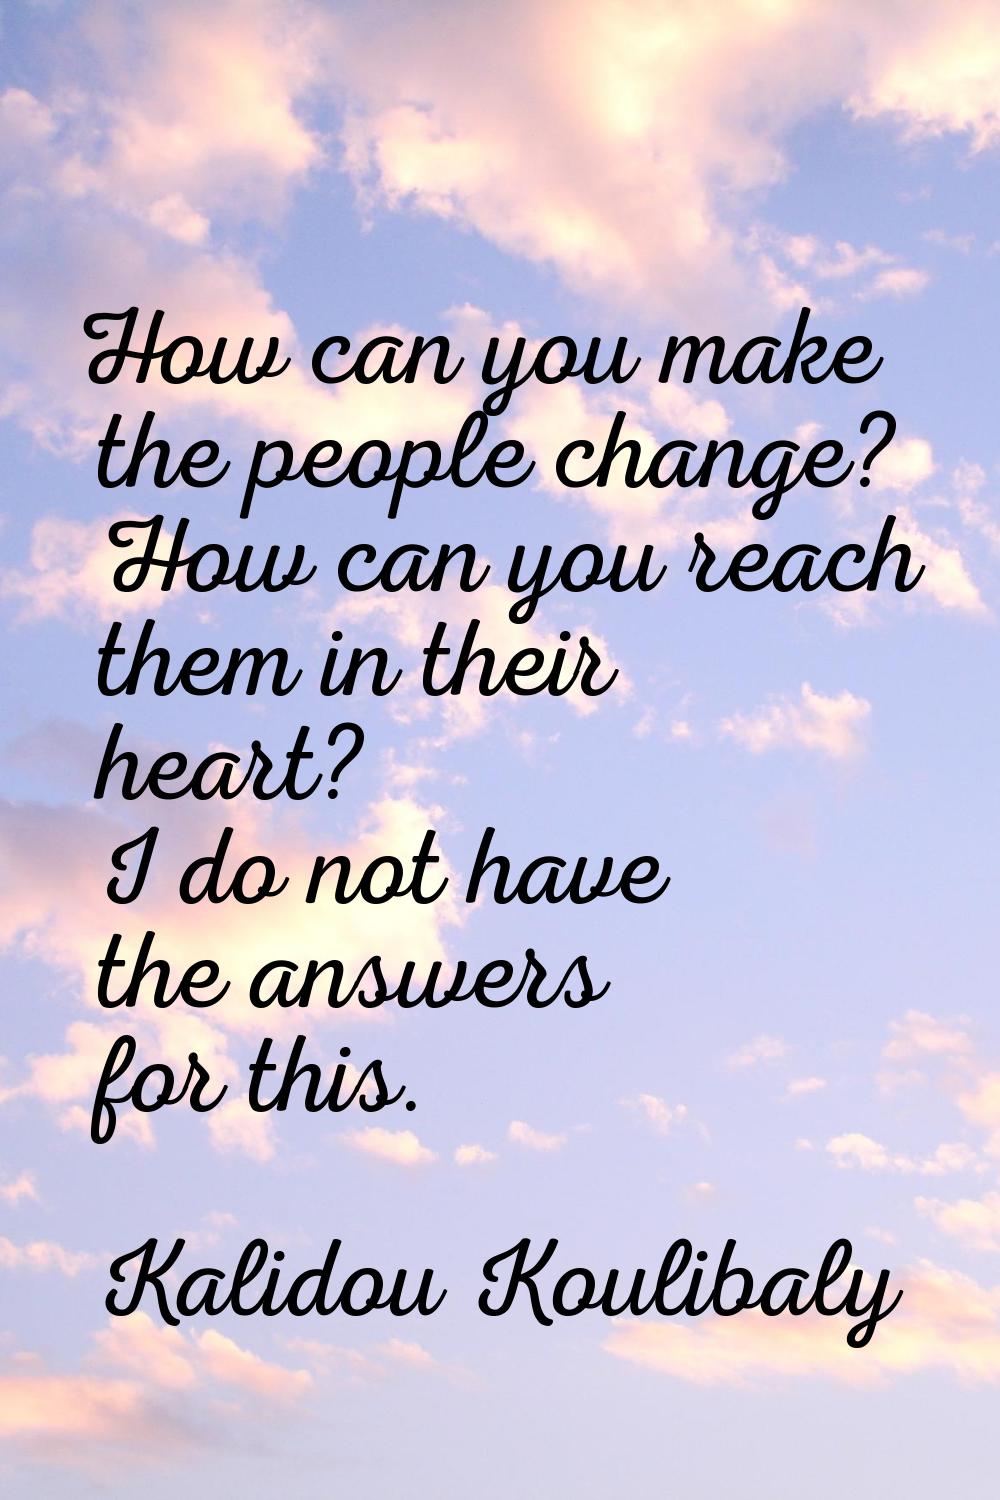 How can you make the people change? How can you reach them in their heart? I do not have the answer